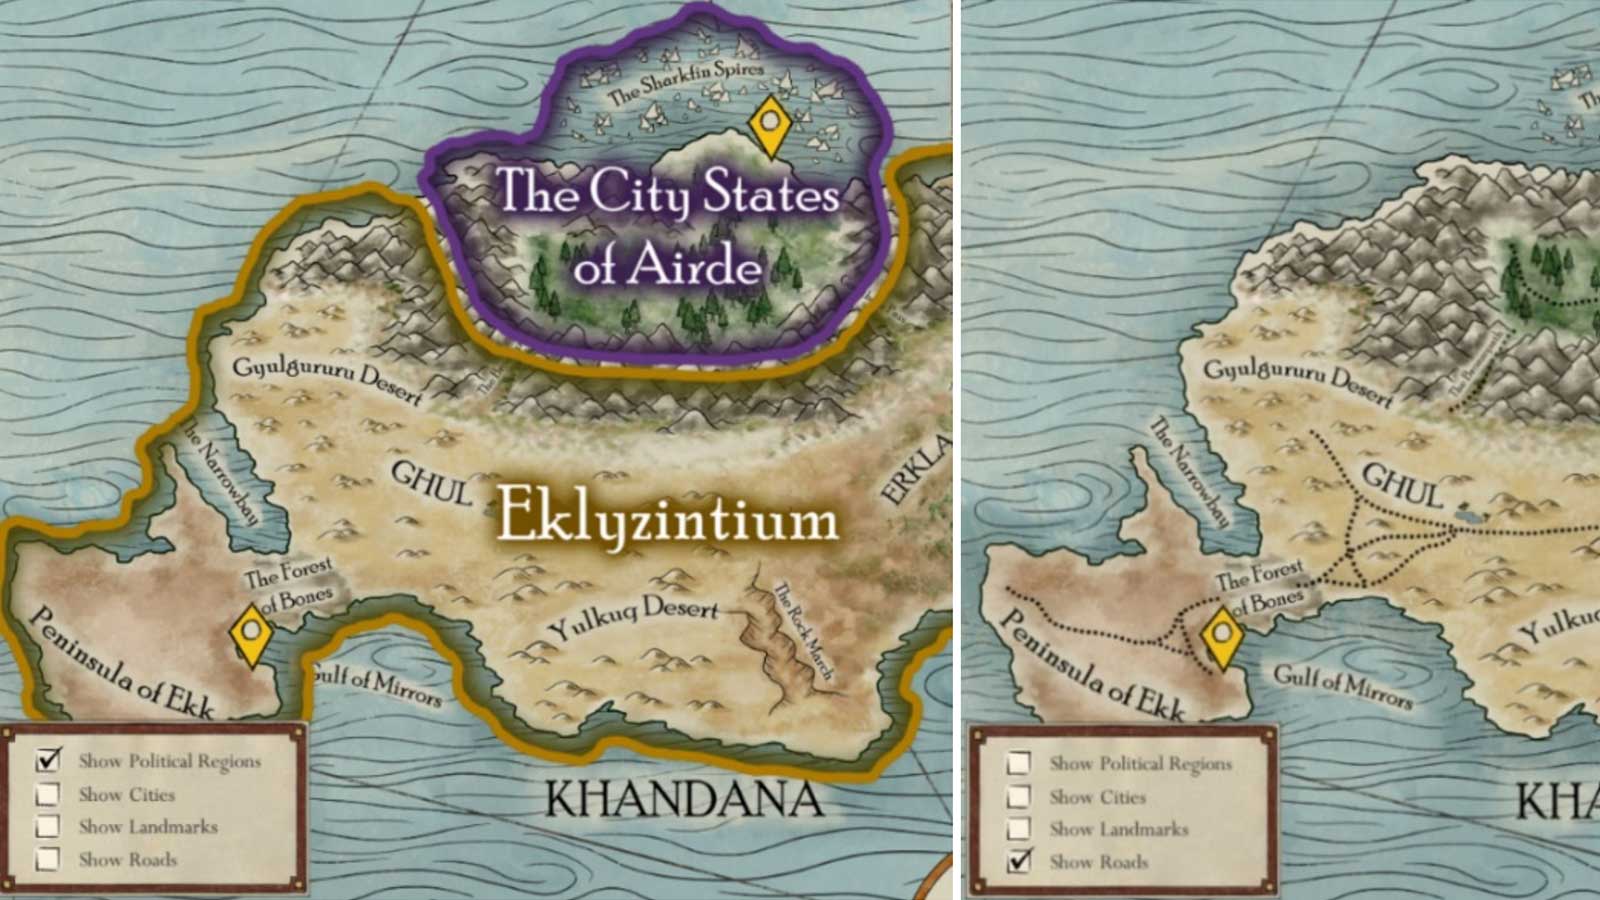 An illustrated map of the fantasy lands Khandana, Eklyzintium, and The City States of Airde.